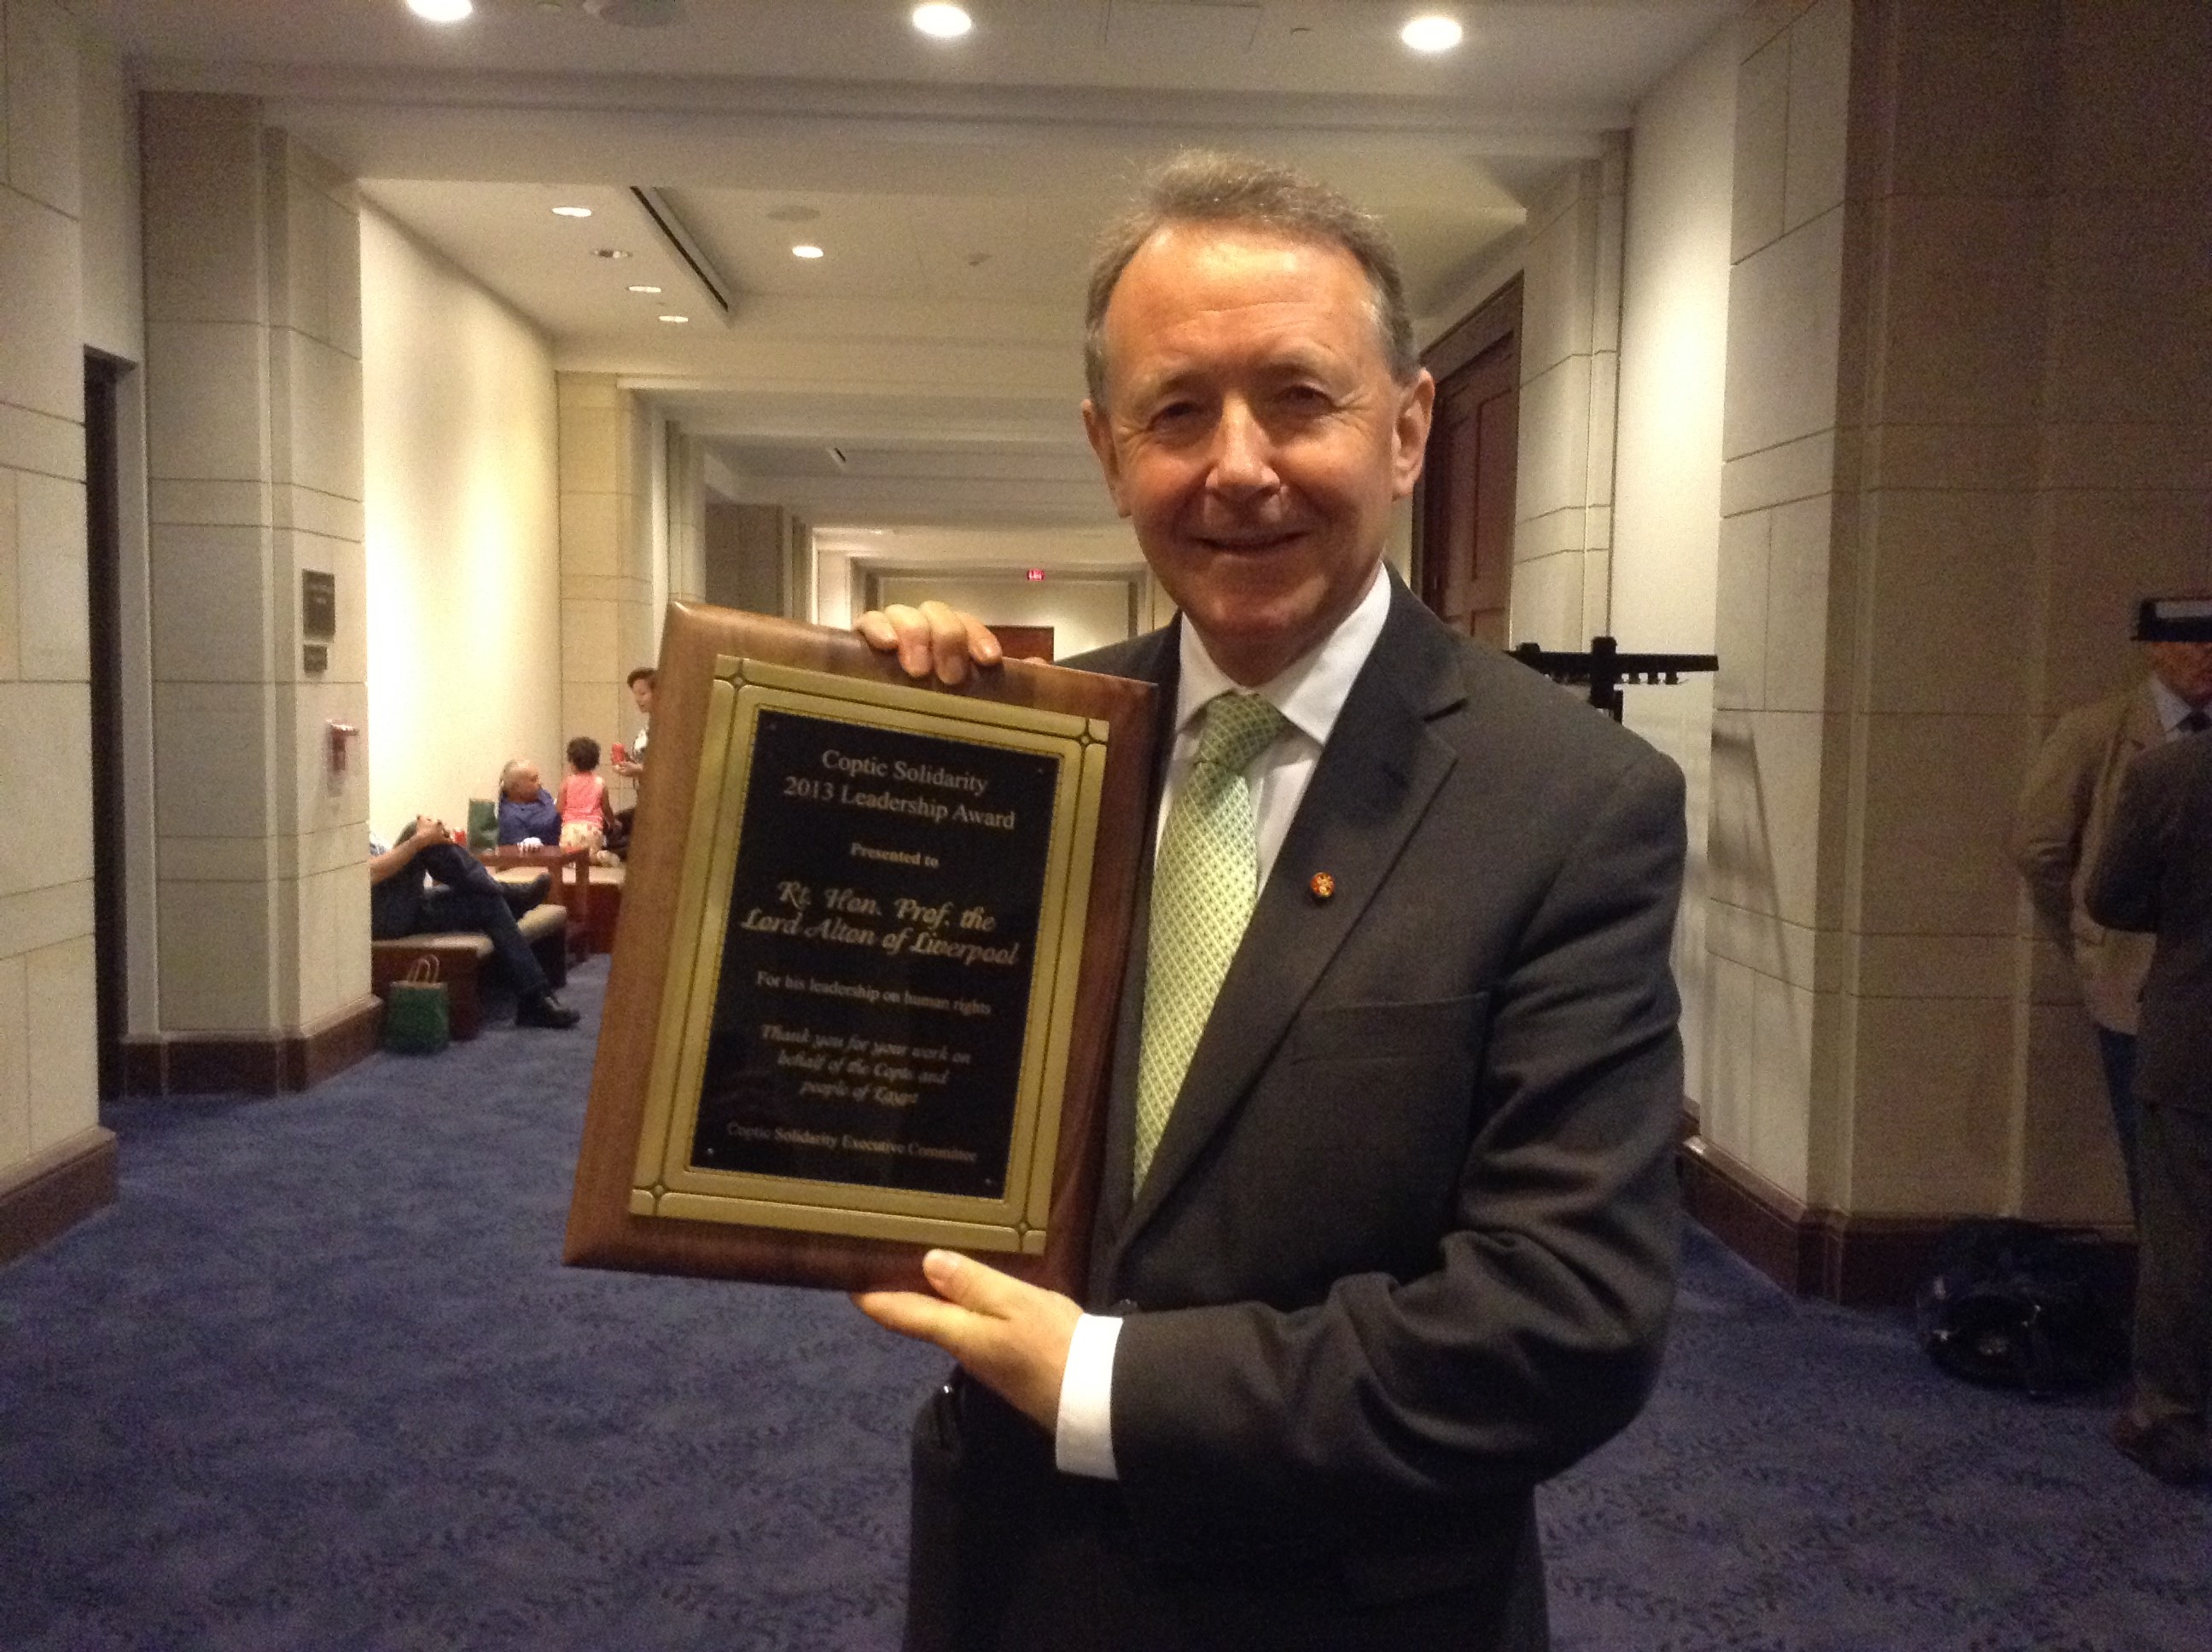 Award for Championing religious Freedom presented at a meeting in the American Congress 2014